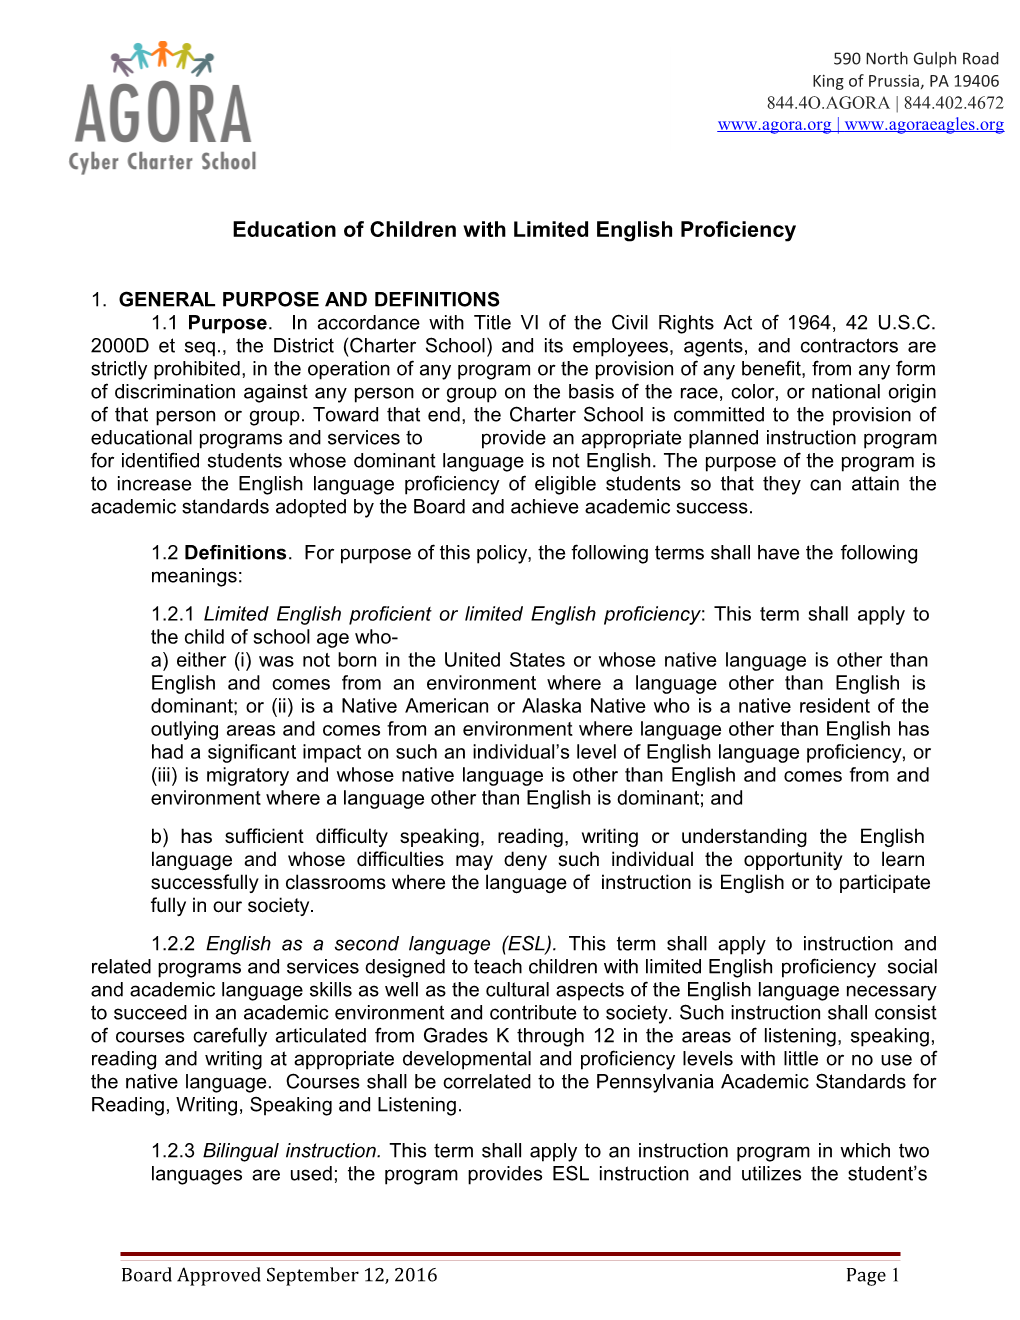 Education of Children with Limited English Proficiency